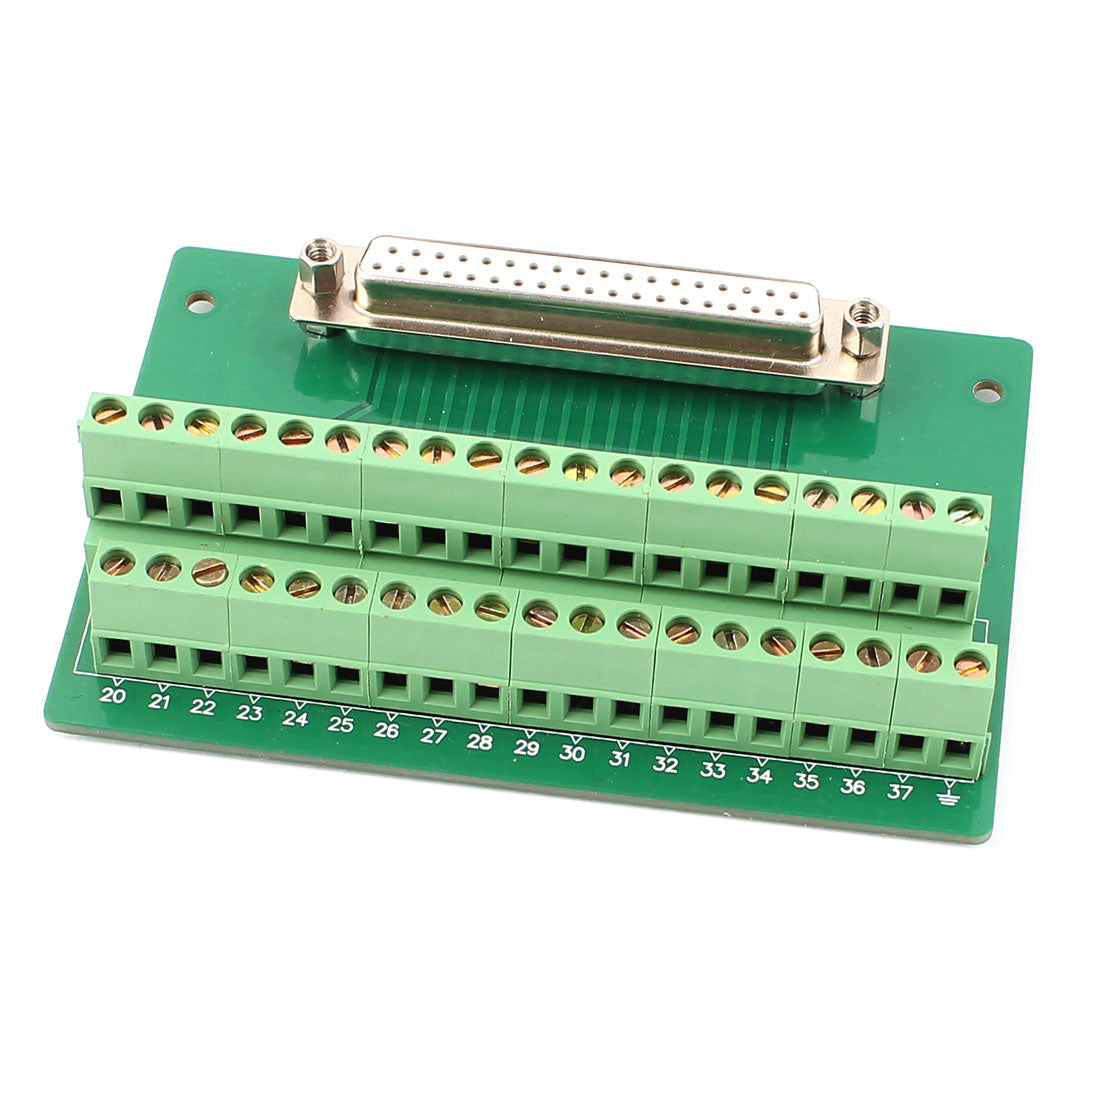 uxcell Uxcell DB37 D-SUB Female Adapter to 37 Pin Port Terminal 2 Row Screw Breakout Board